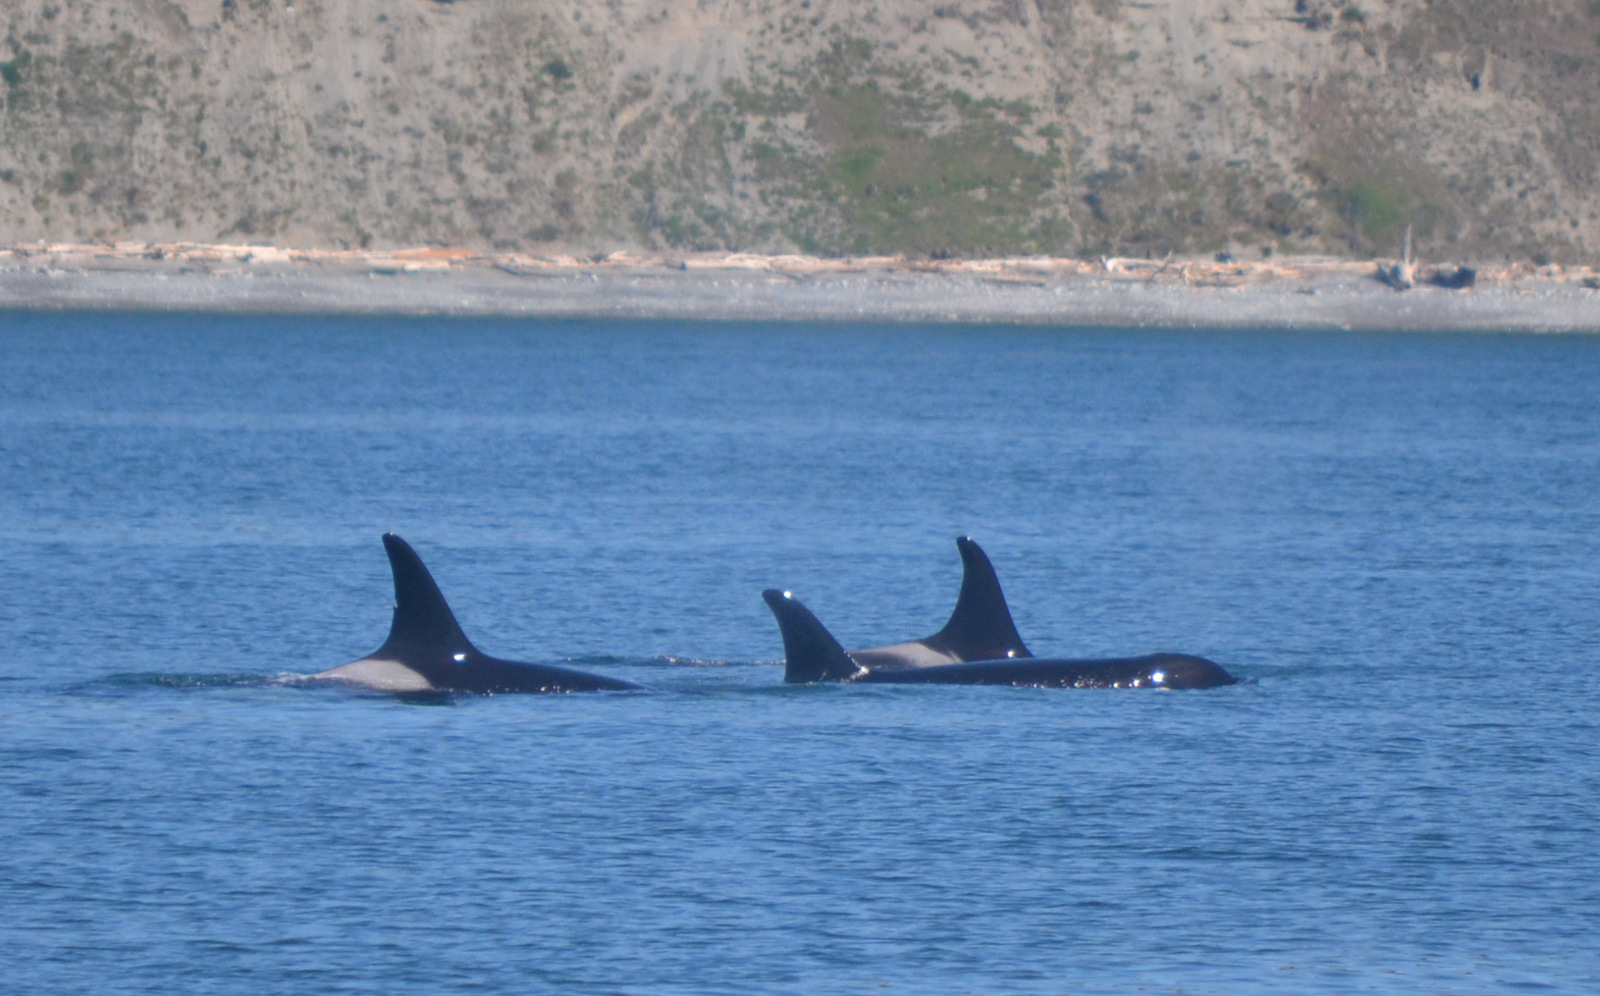 Getting Orca-Spoiled in April! Orcas spotted again in the waters around San Juan Island